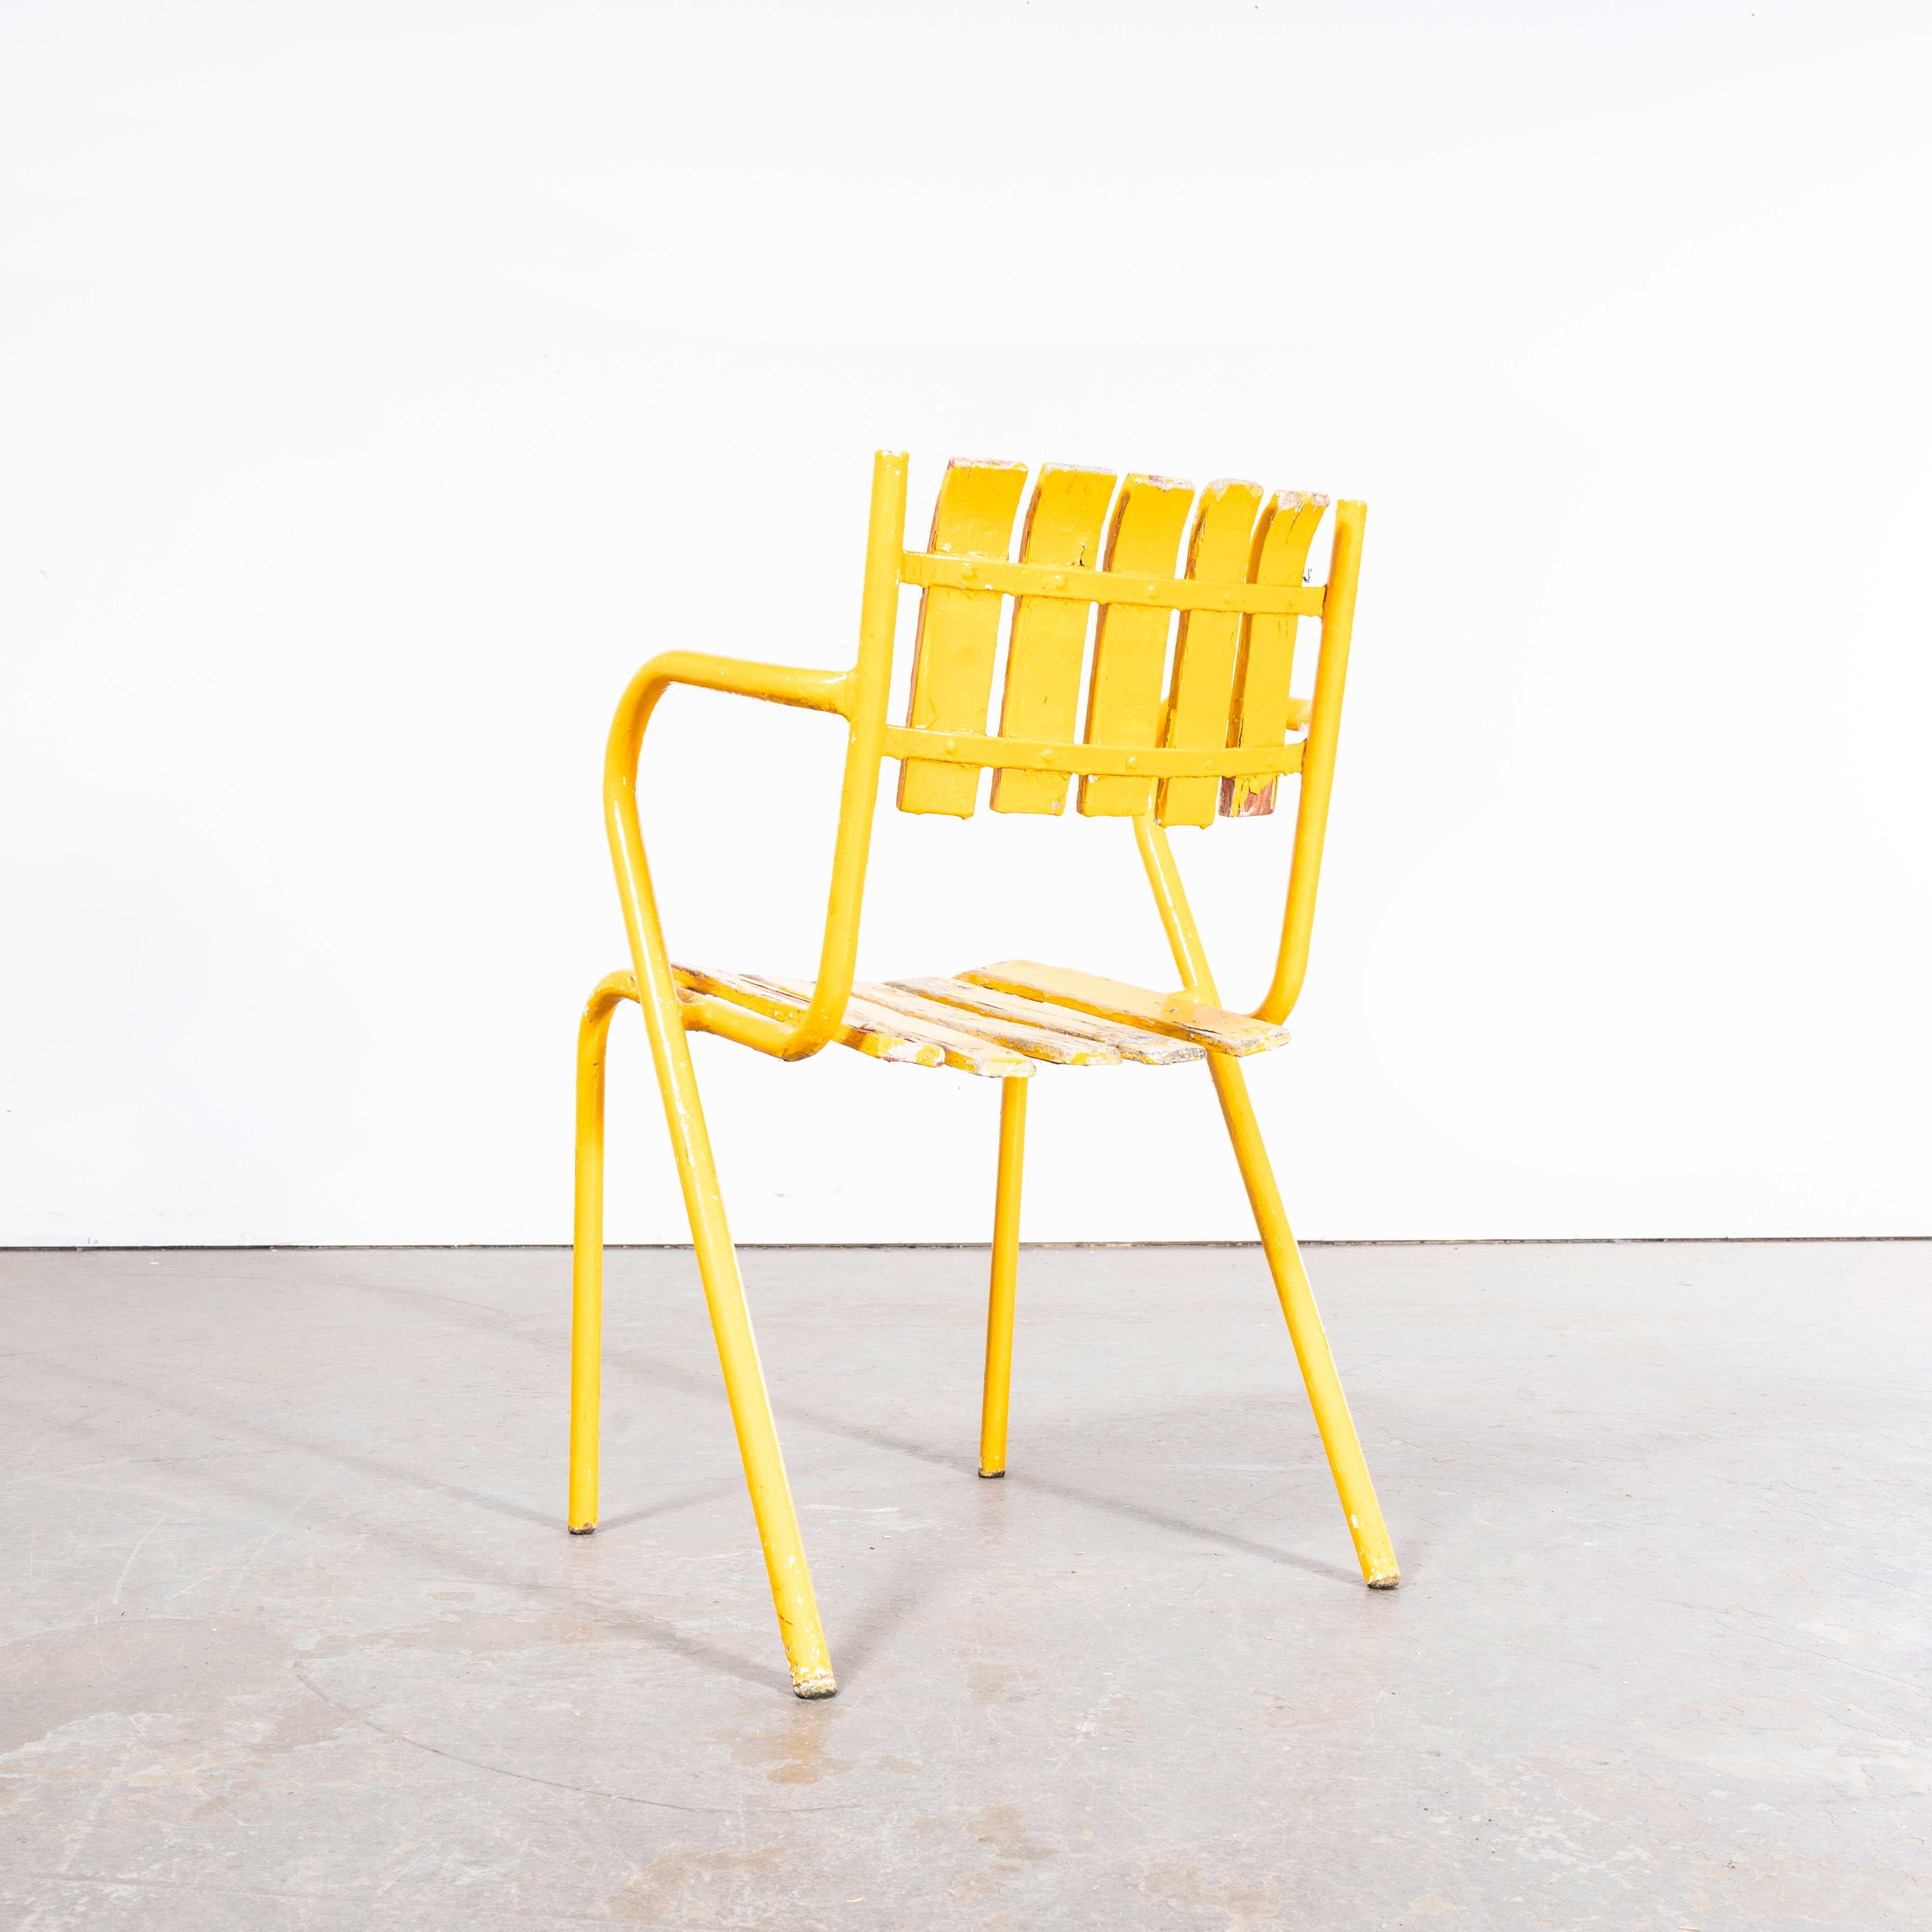 1950’s Original French Outdoor Yellow Slatted Chairs – Various Quantities Available

1950’s Original French Outdoor Yellow Slatted Chairs – Various Quantities Available. Absolutely stunning and unusual set of French very fifties outdoor chairs.